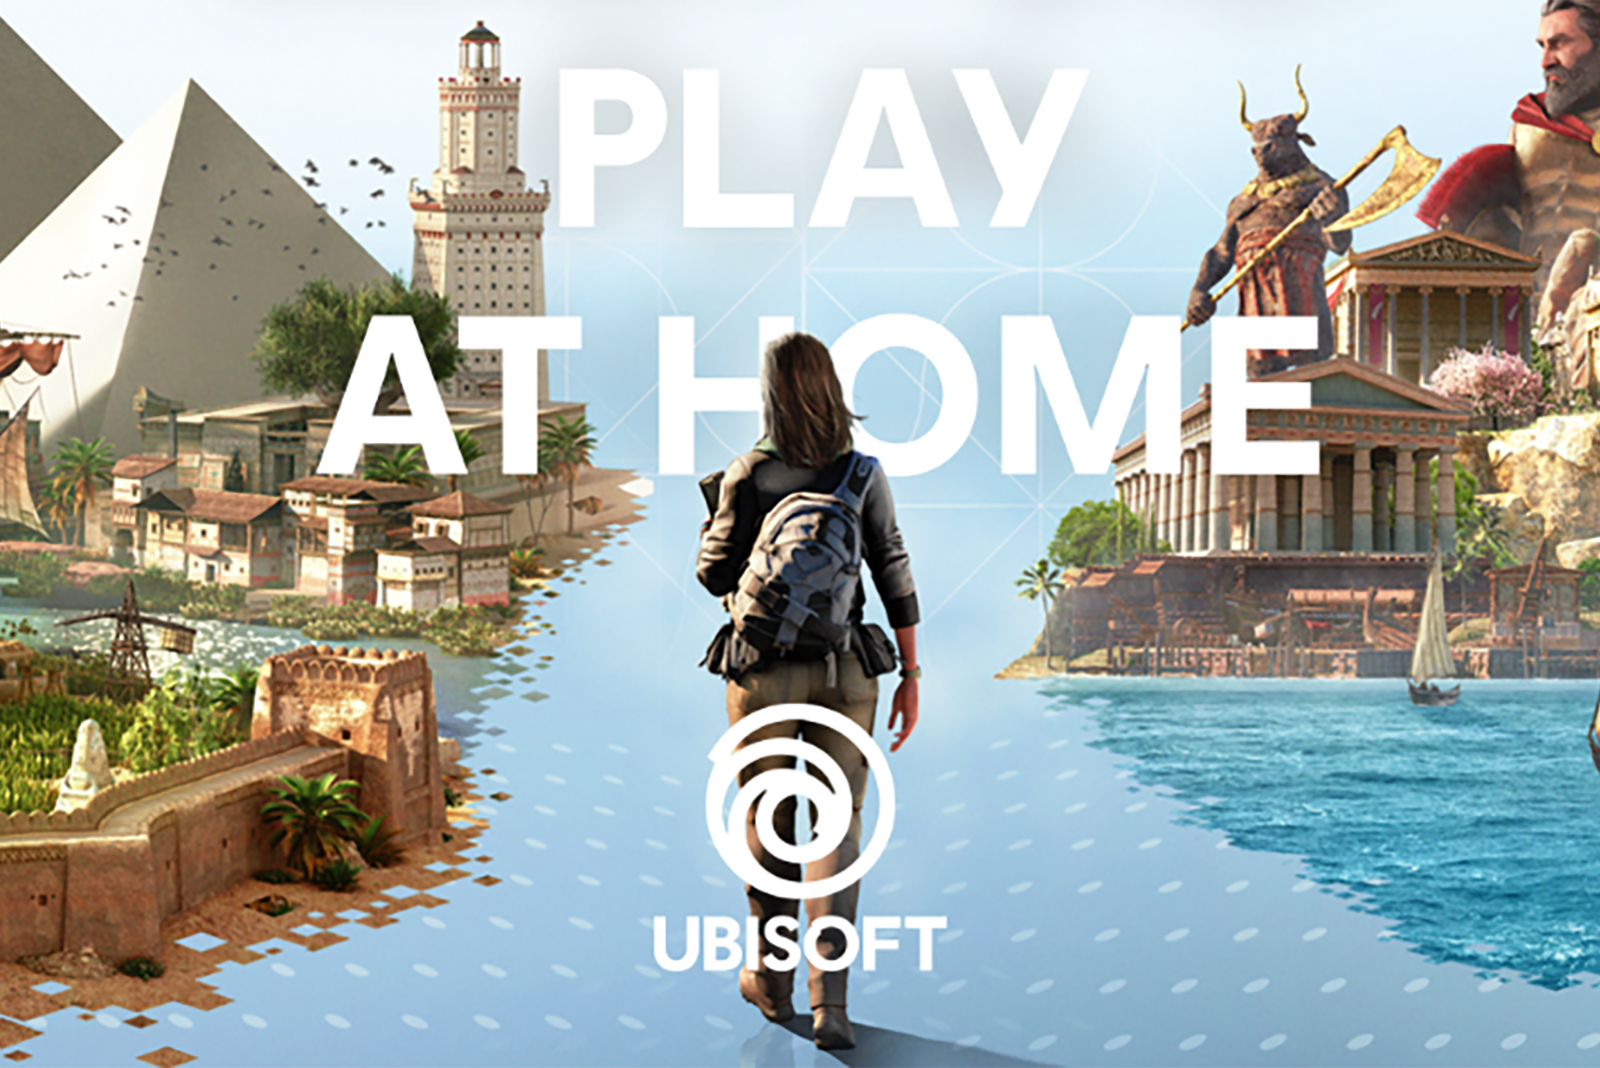 Ubisoft is giving out Assassin’s Creed Ancient Egypt and Greece tours for free image 1